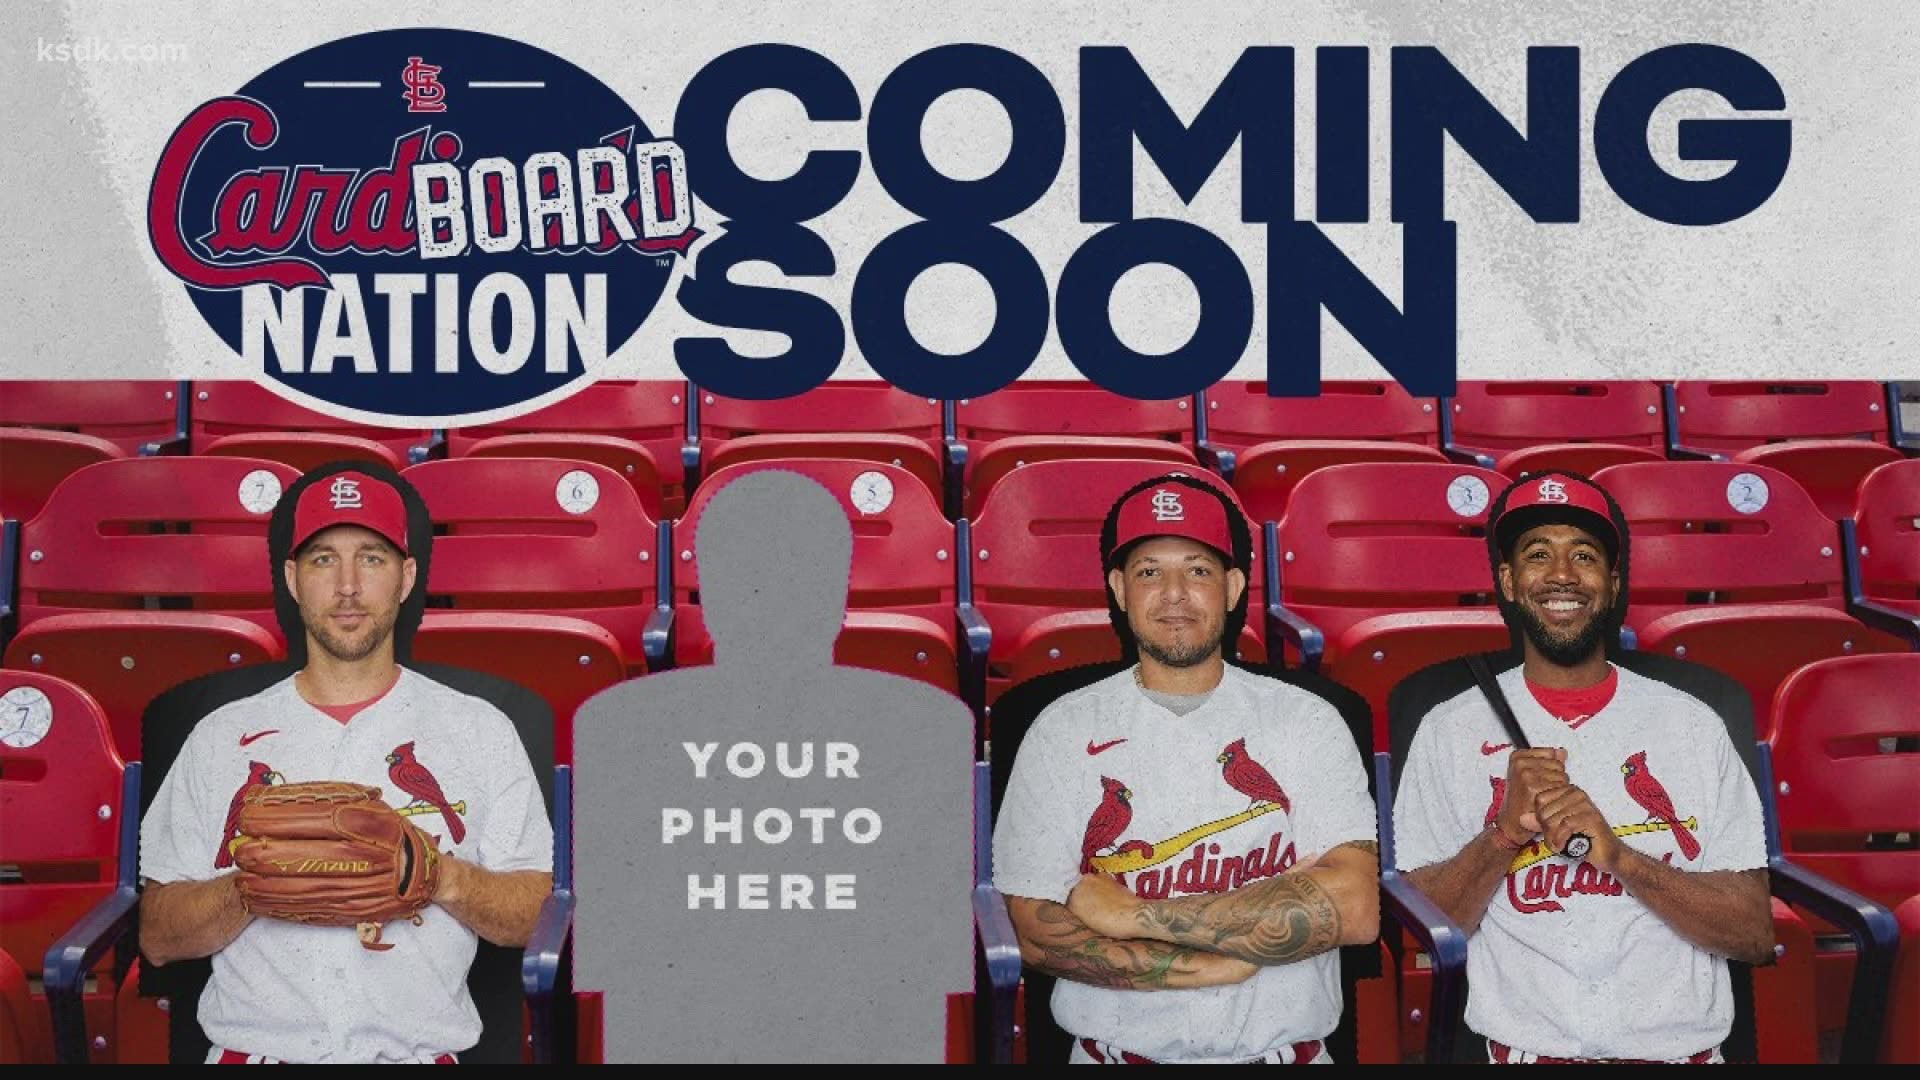 On Thursday, the Cardinals sent out a tweet saying they'll be placing cardboard cutouts in the stands at Busch Stadium "coming soon."